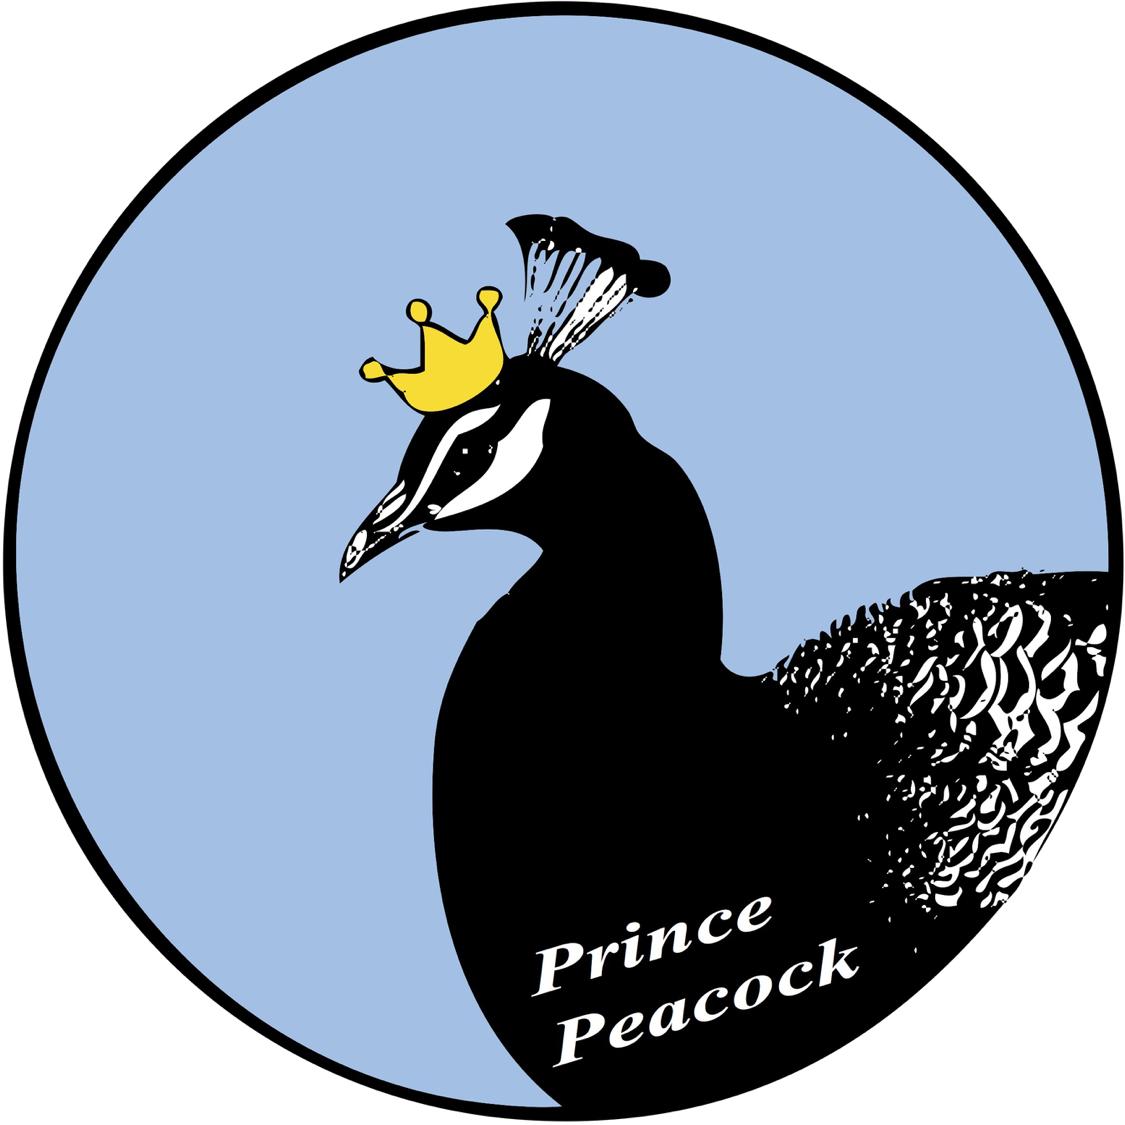 PrincePeacock's images